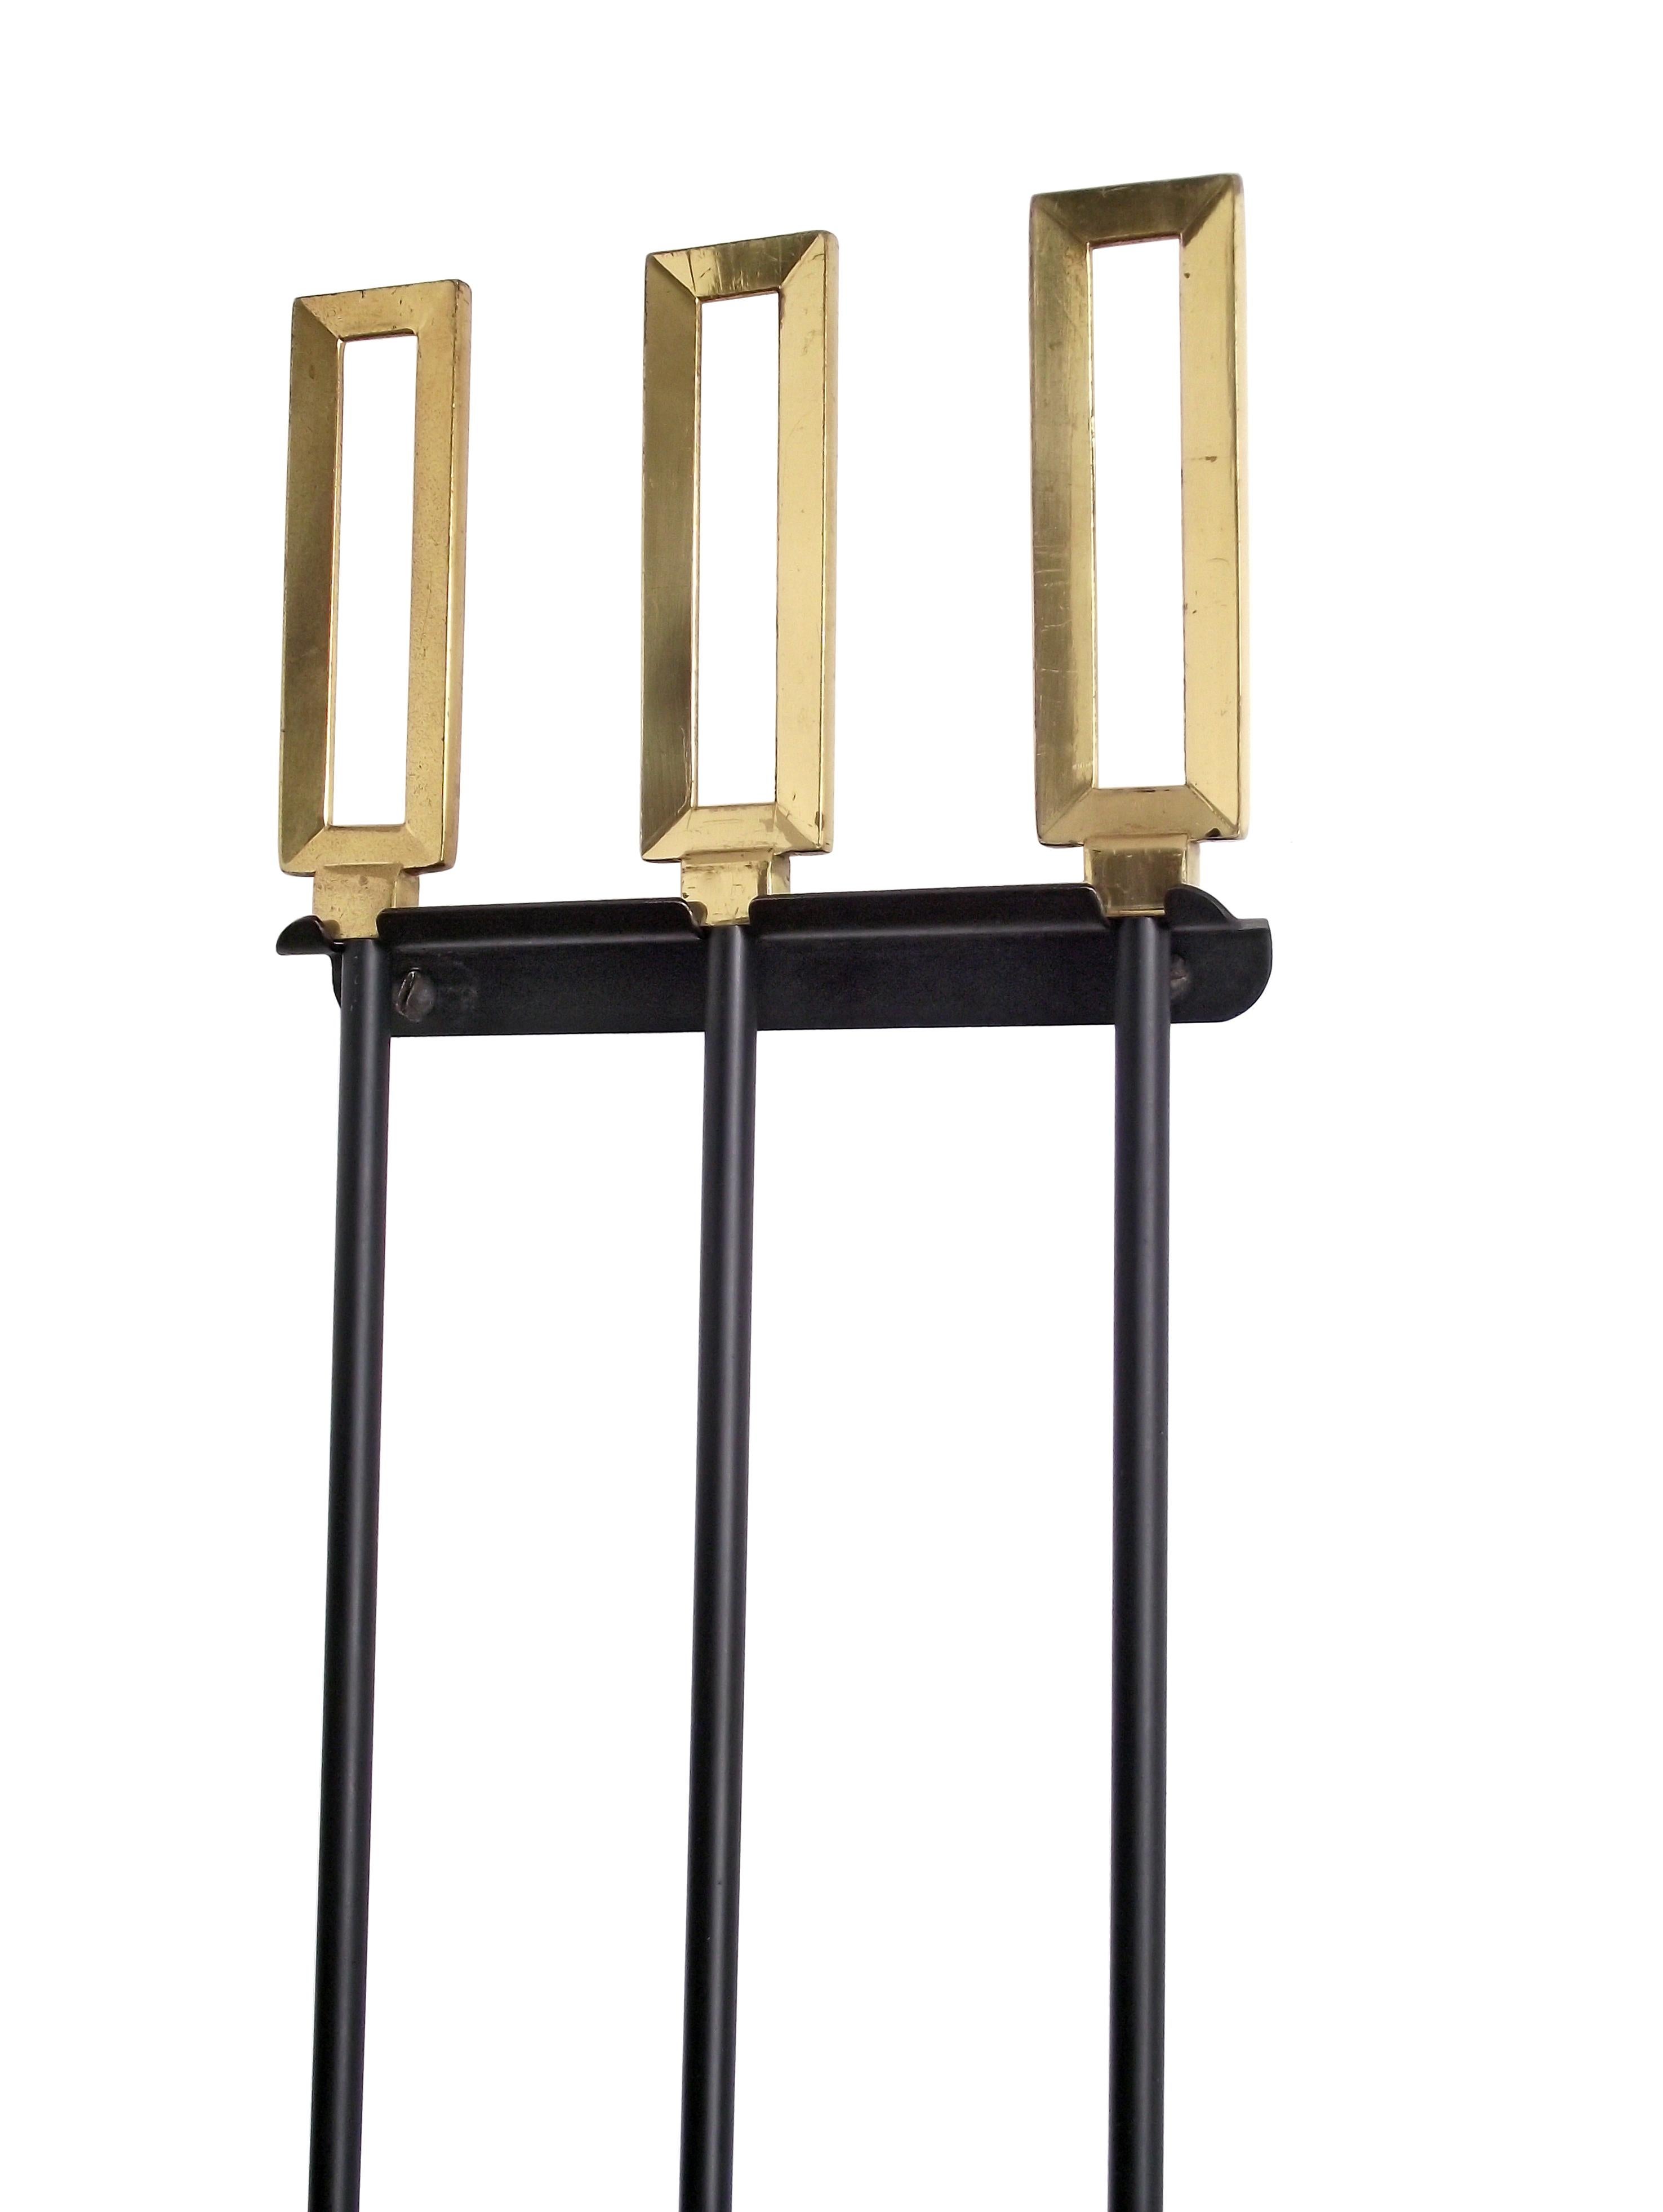 Mid-Century Modern Set of Wall Mount Fire Tools with Brass Handles, circa 1960